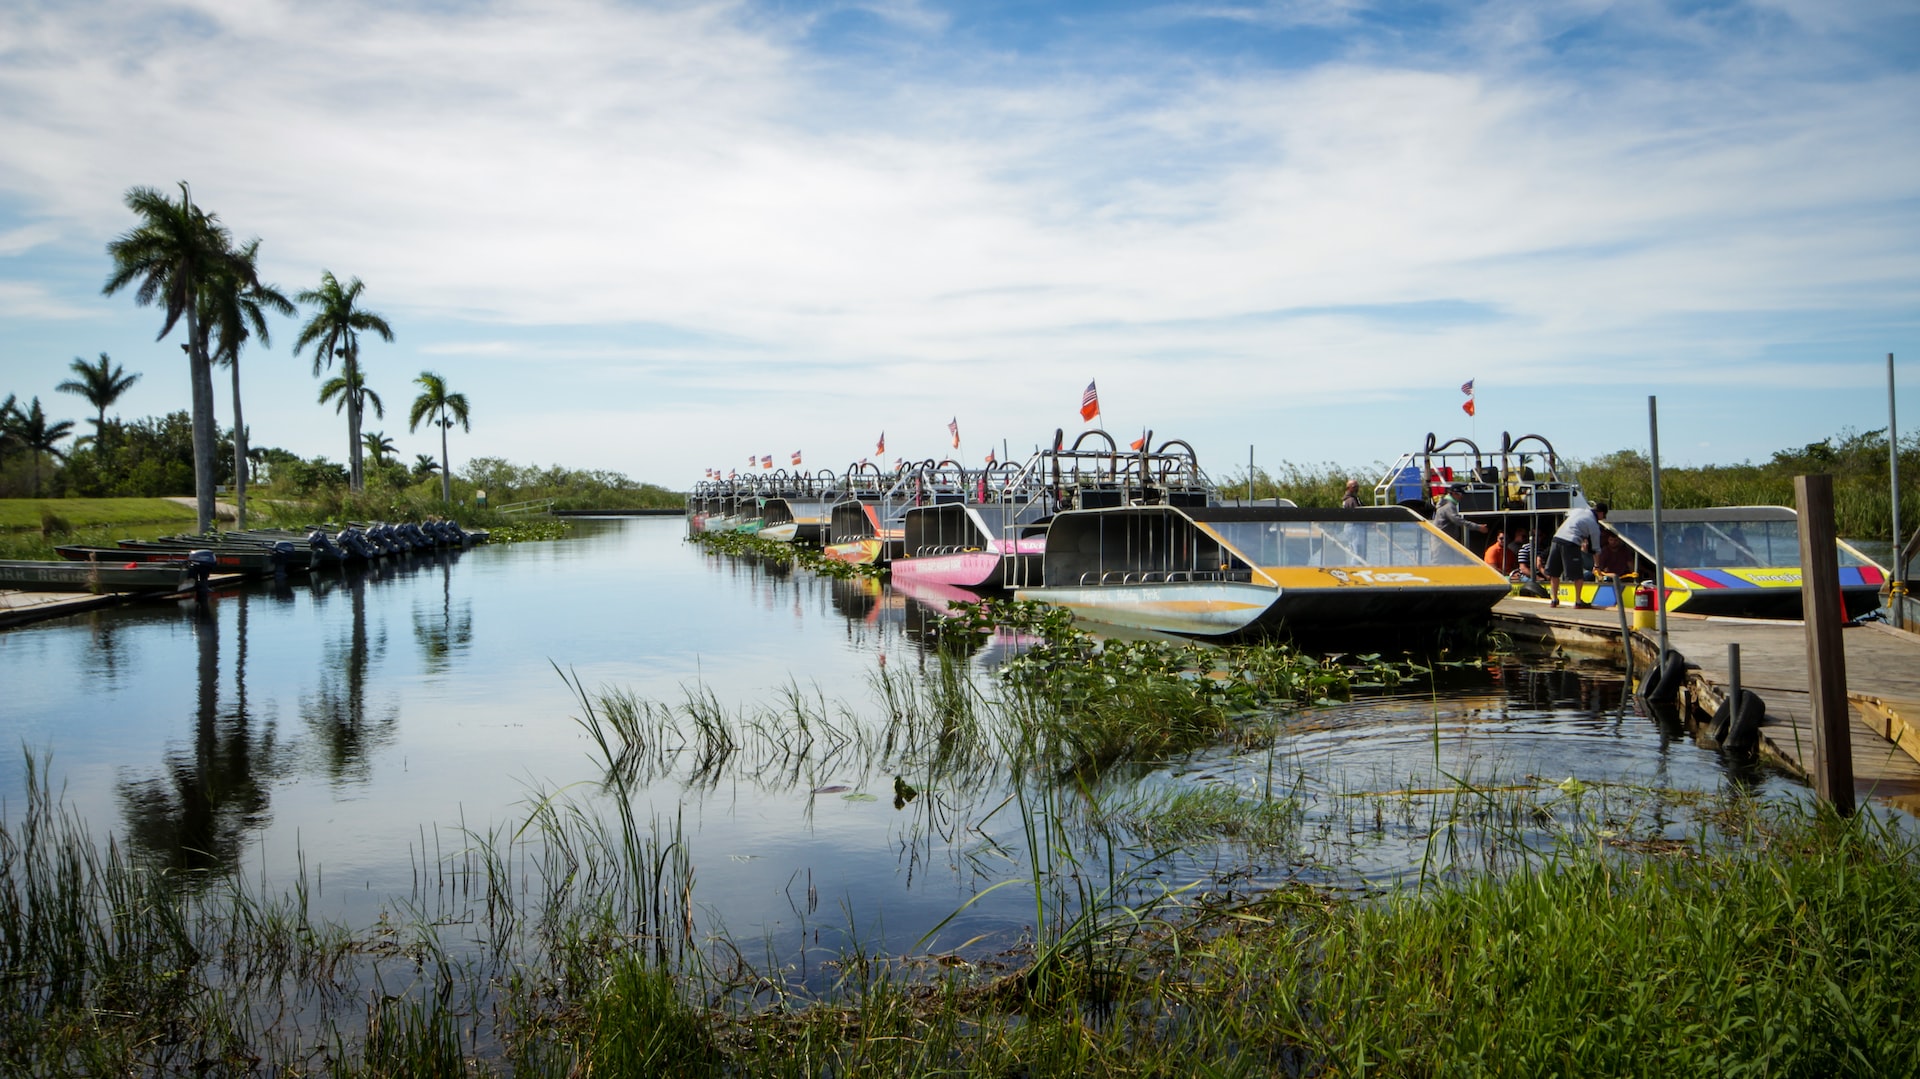 A series of colorful fan boats in the Everglades.